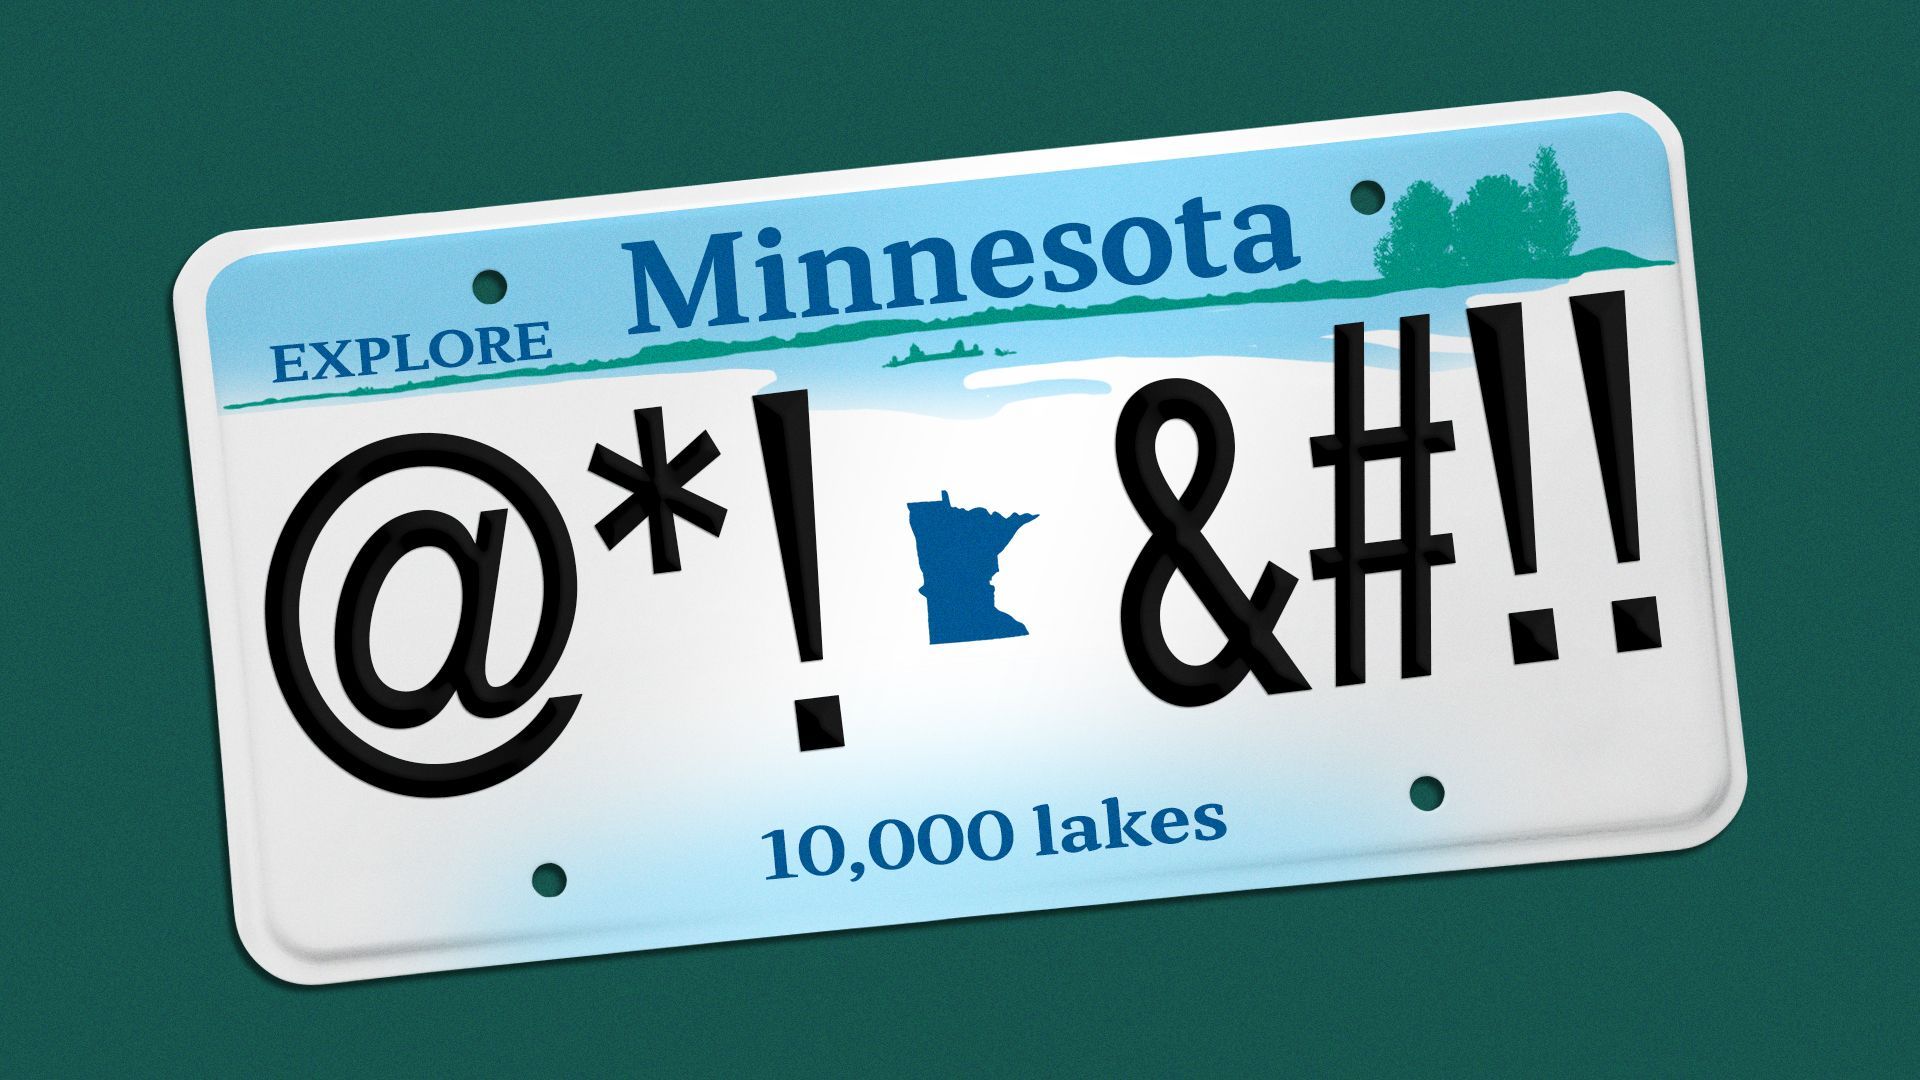 Illustration of Minnesota license plate with symbols implying a swear word.